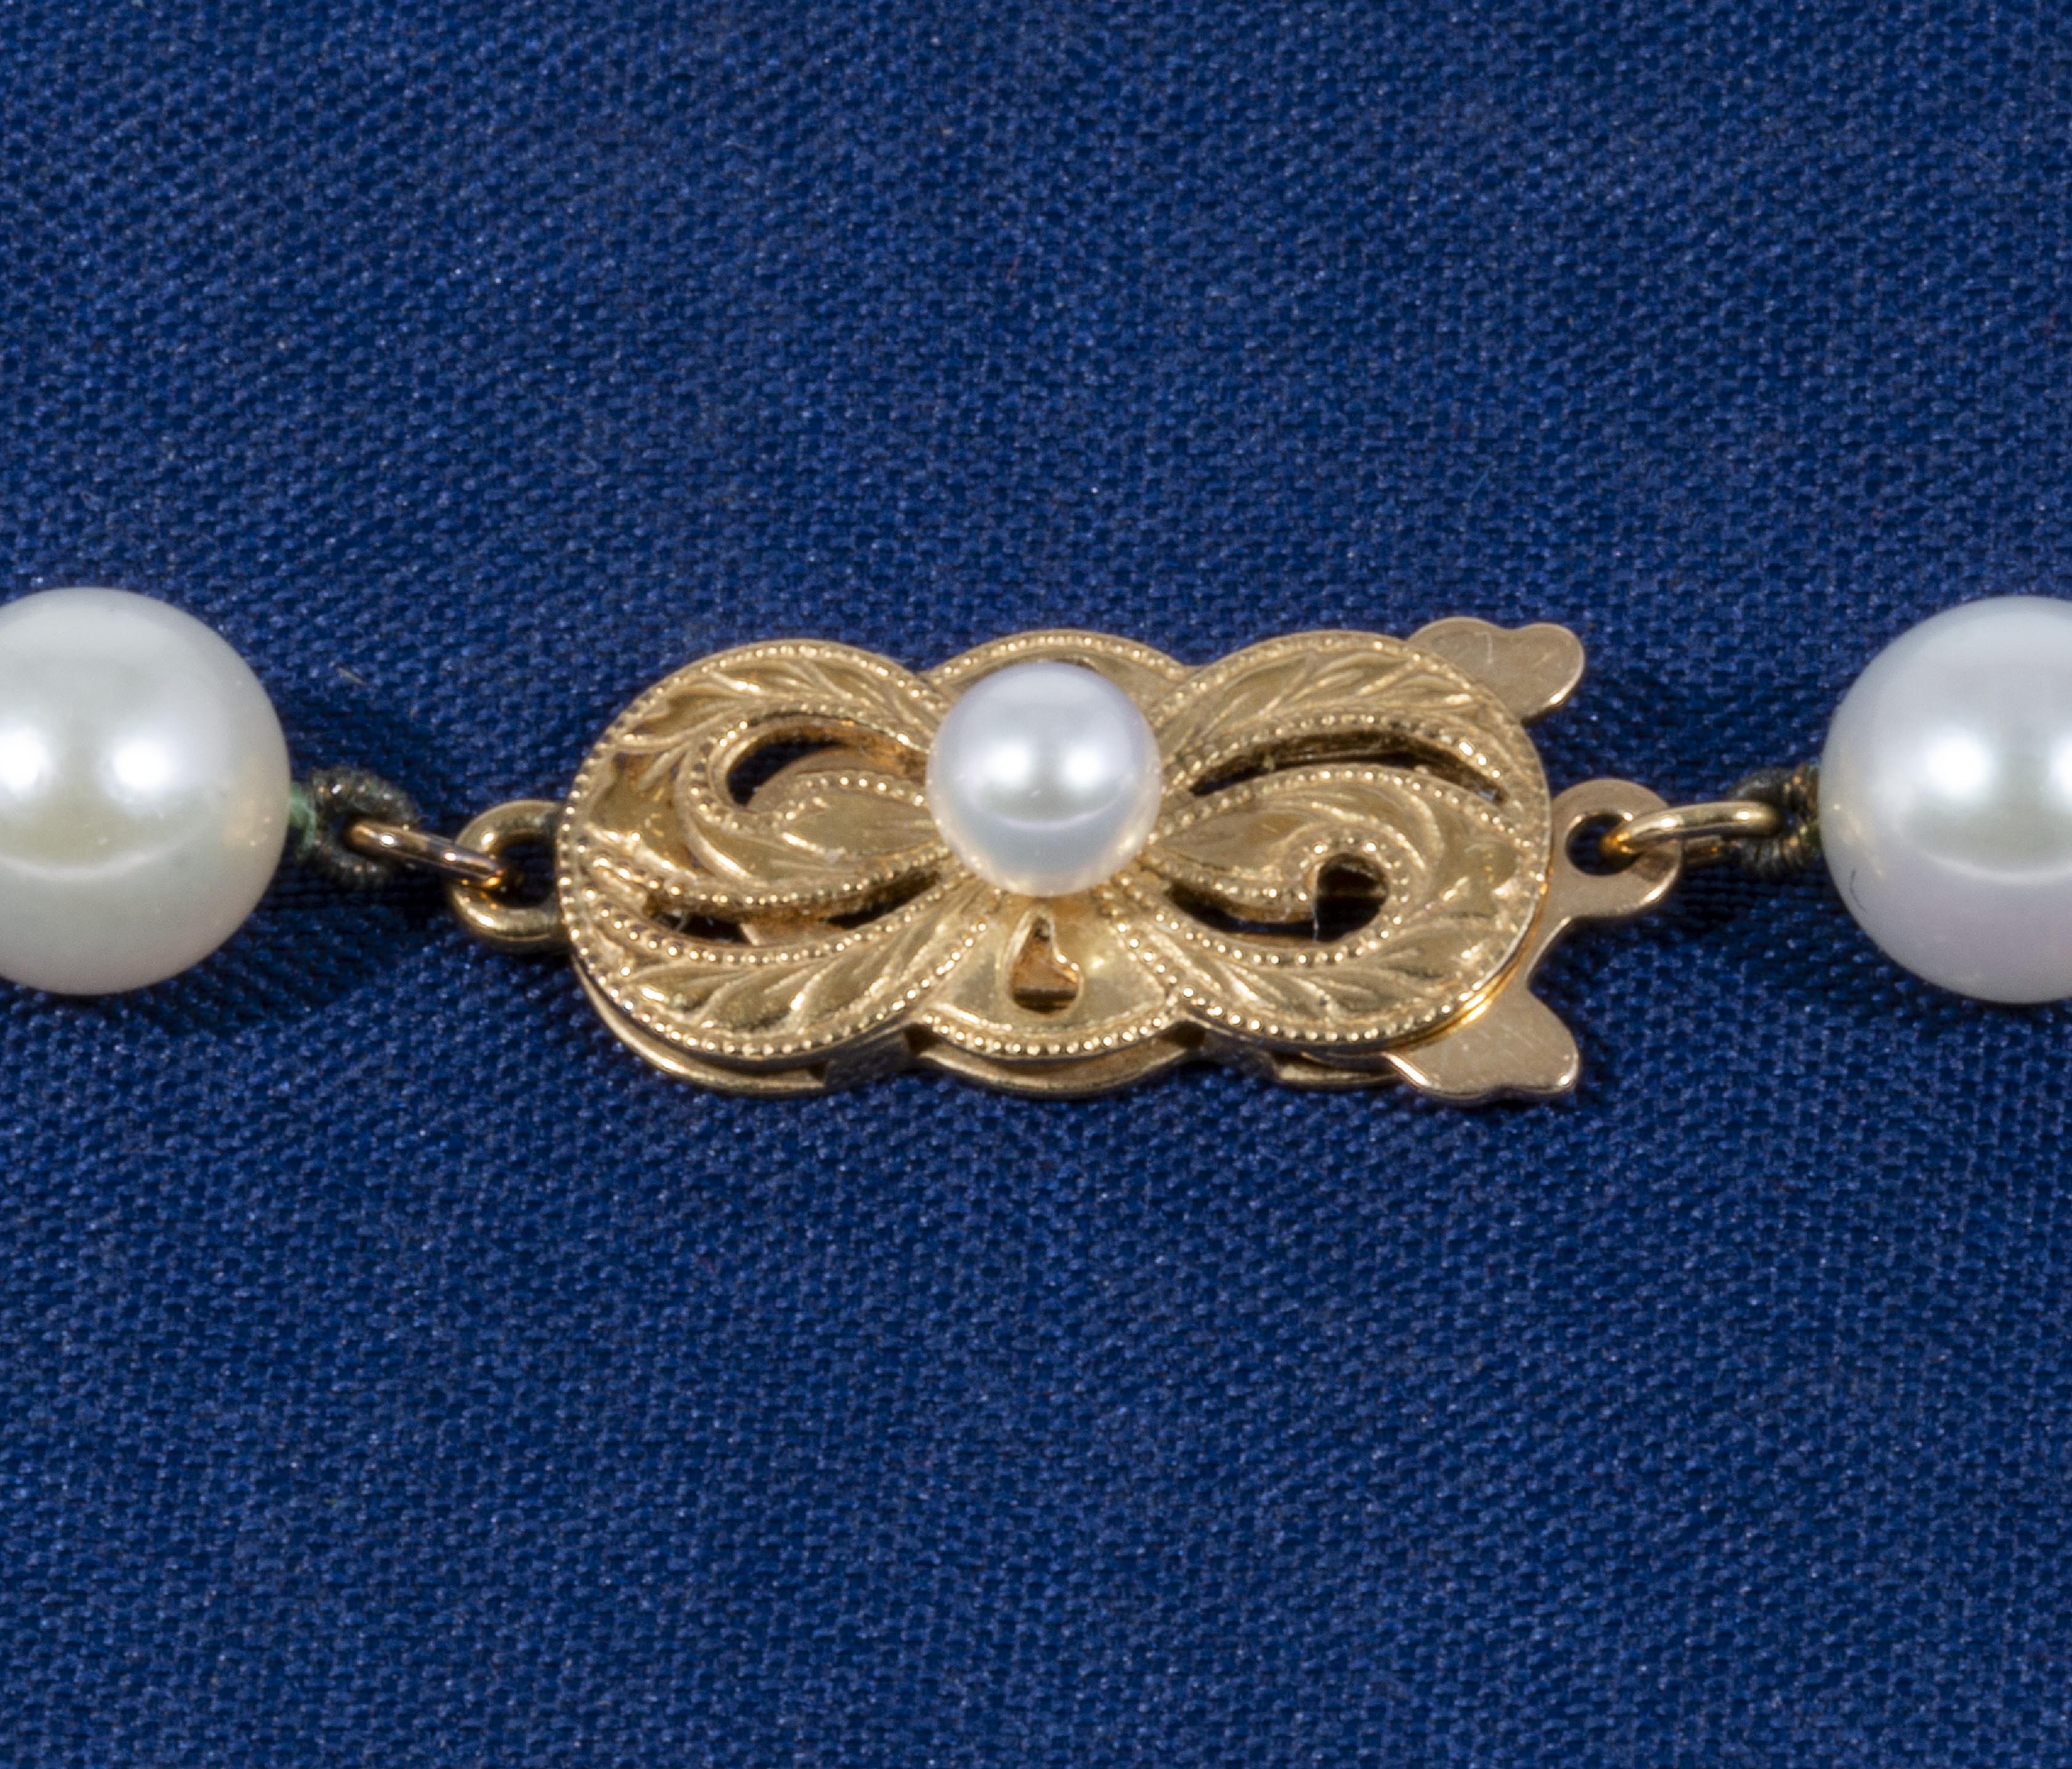 A Mikimoto White South Sea Cultured Pearl Strand Necklace 24 inches, 18ct gold clasp, in original - Image 2 of 3